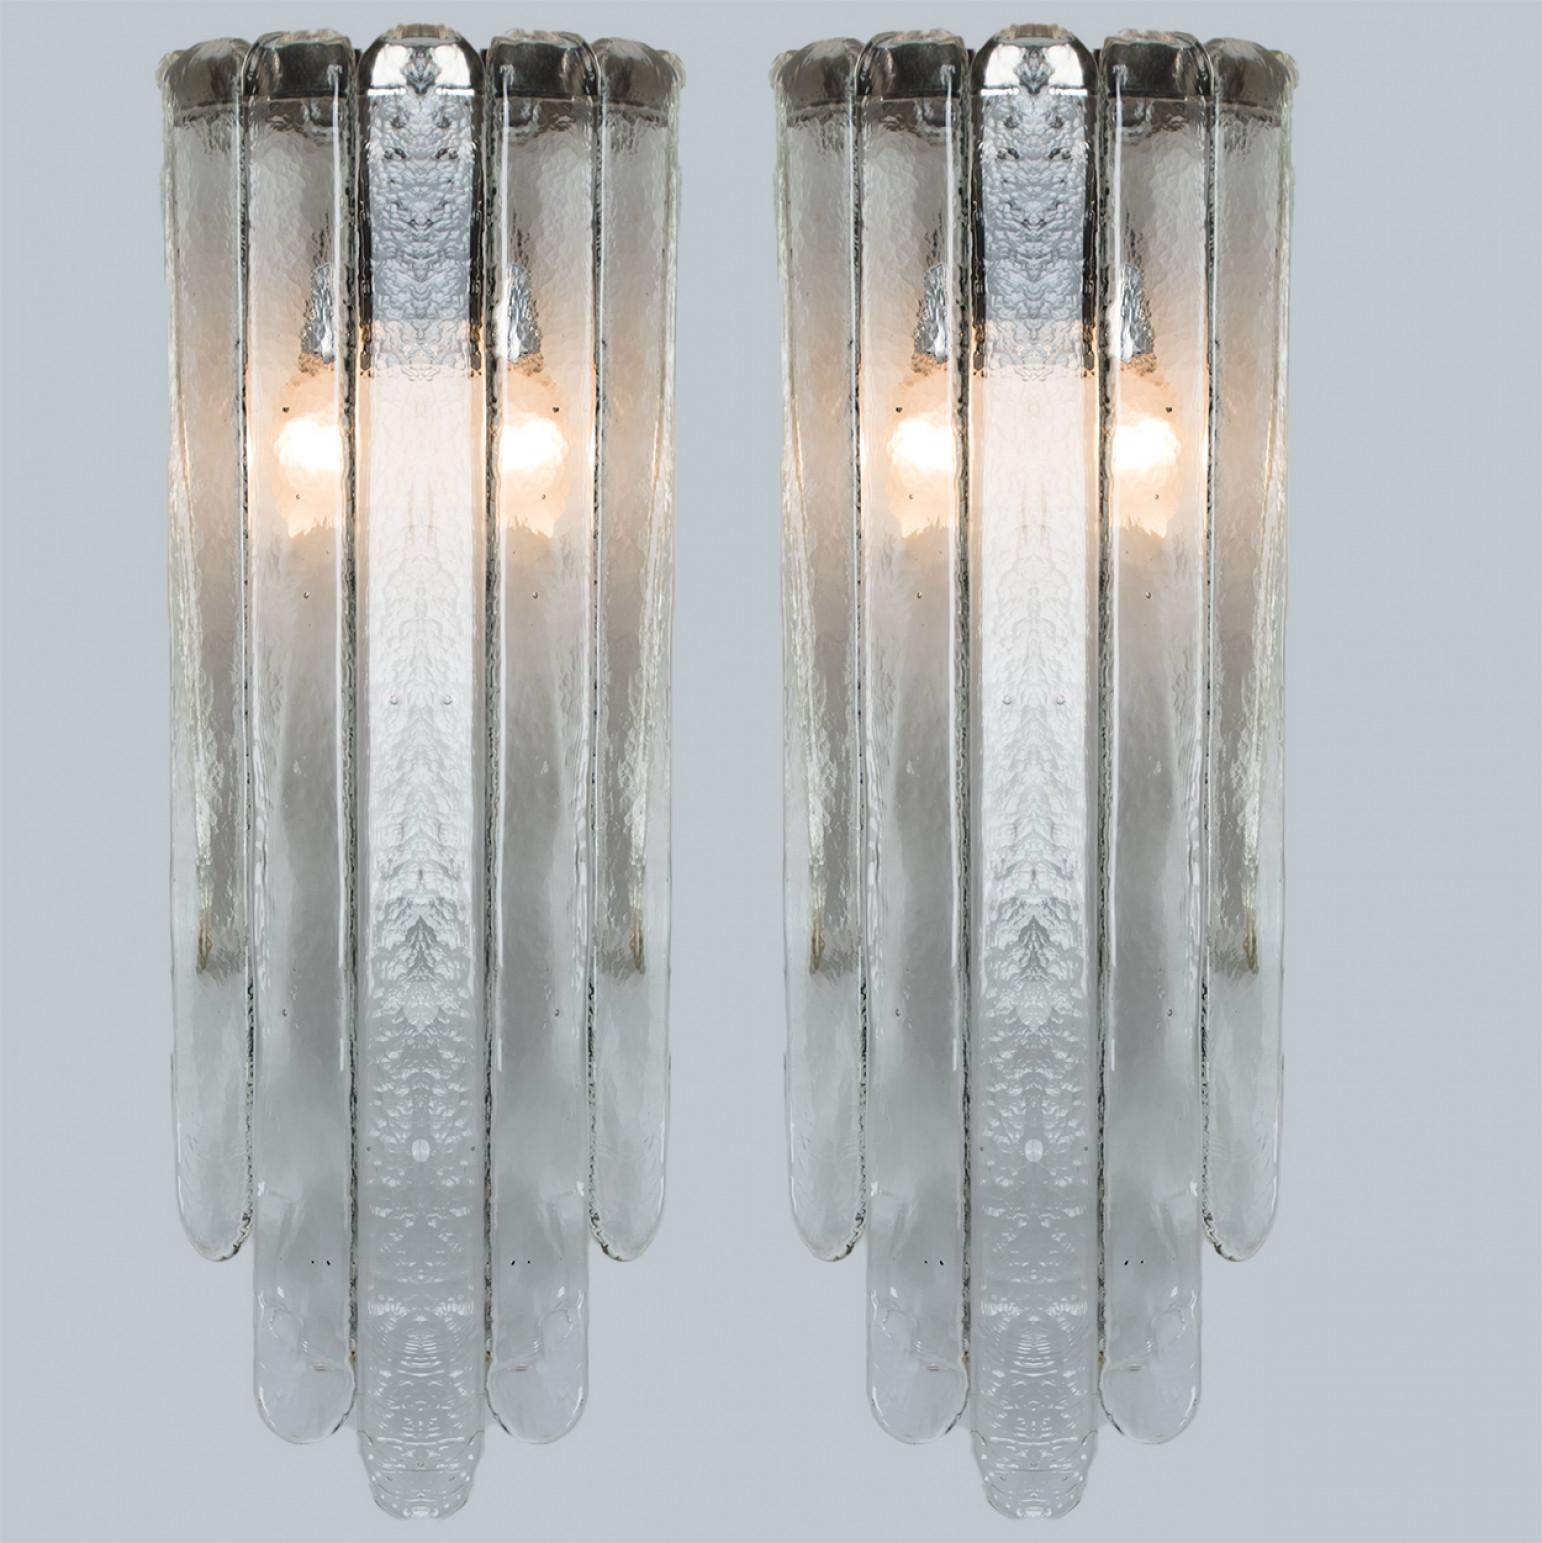 Pair of beautiful elongated wall lights, by Mazzega. A clear glass with the shape of a double pan-flute compose this beautiful piece made in thick handmade Murano glass.

Dimensions:
Height: 23.62